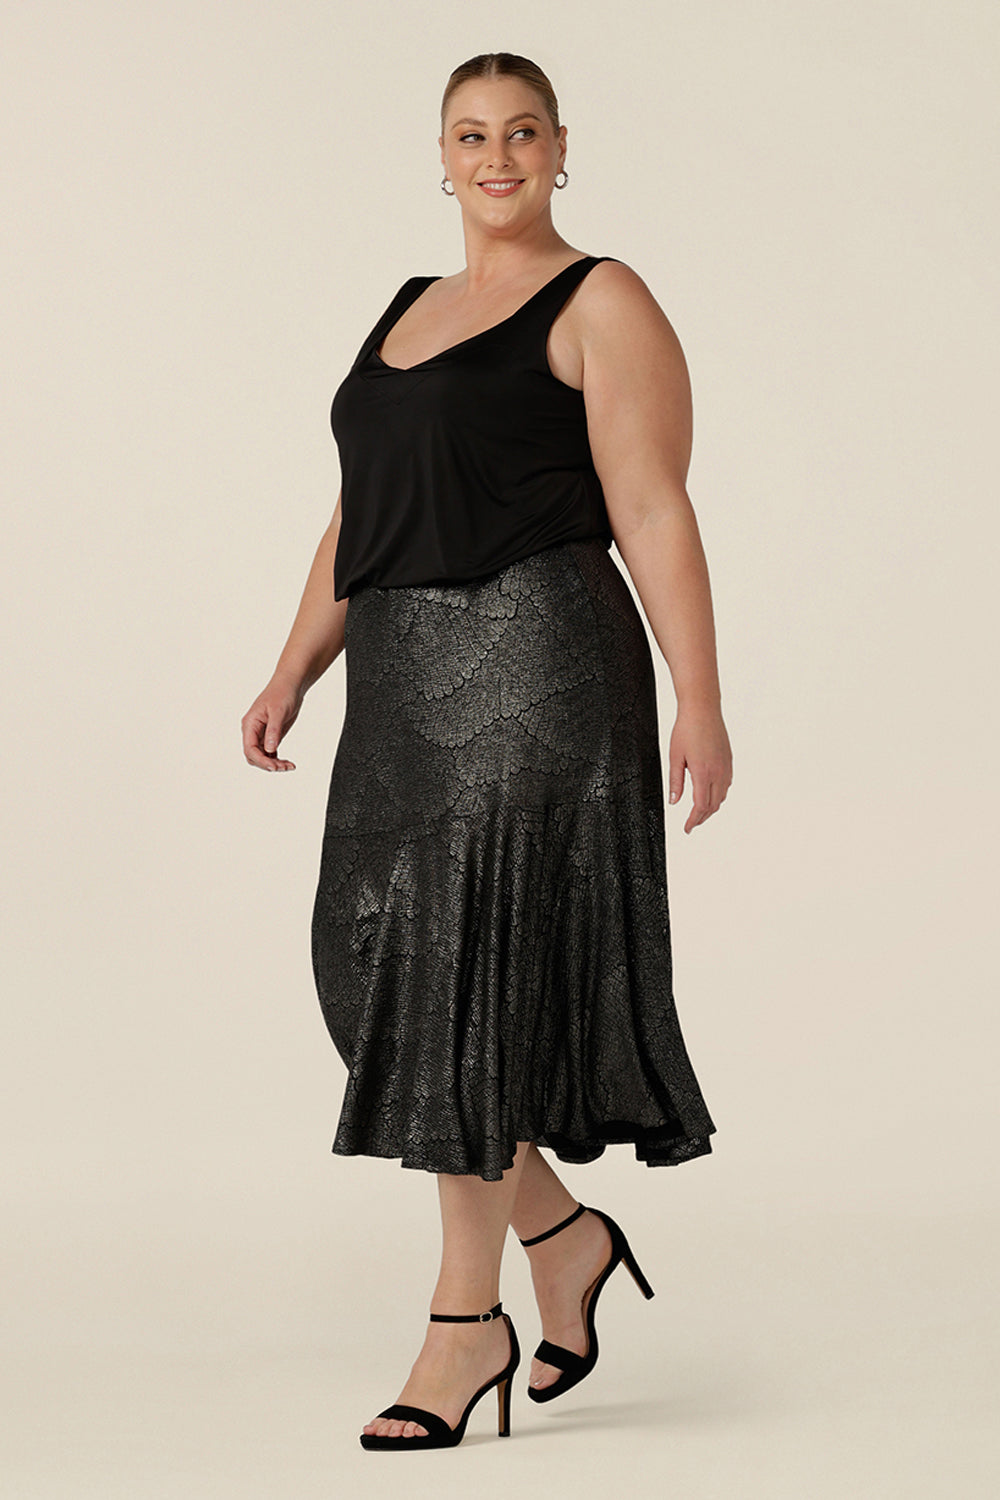 Side view of a size 18, plus size woman wears a midi length, foil print evening skirt with ruffle hem. For cocktail and evening wear, this elegant skirt is worn with a black cami top. Both cocktail skirt and top are made in Australia by women's fashion brand, Leina & Fleur. Shop their evening and cocktail wear online in petite to plus sizes.